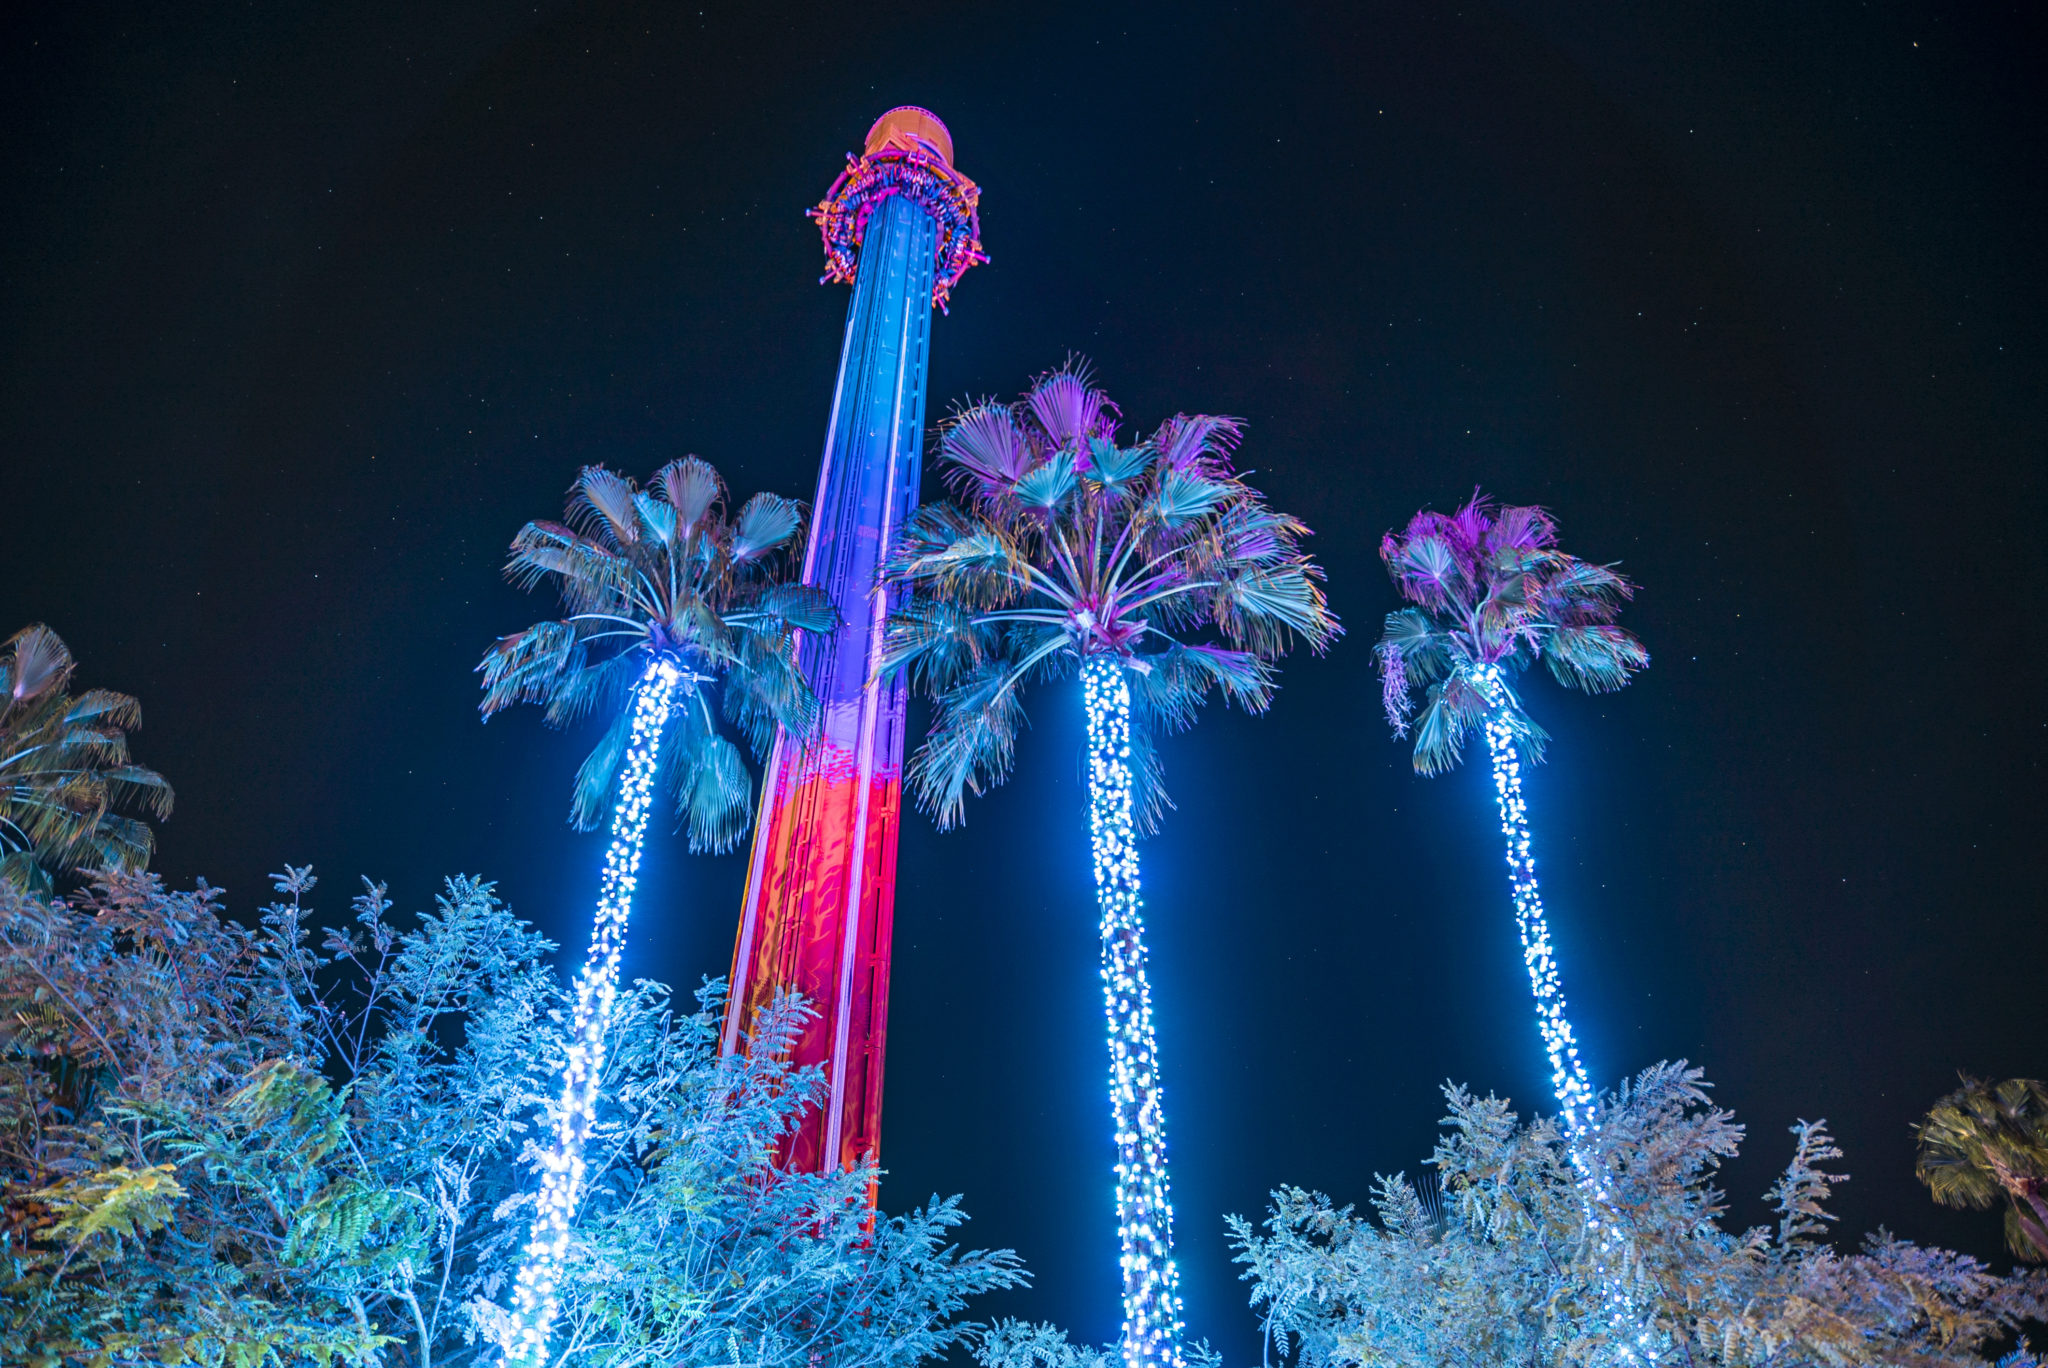 Christmas is coming to Busch Gardens Tampa earlier than ever before